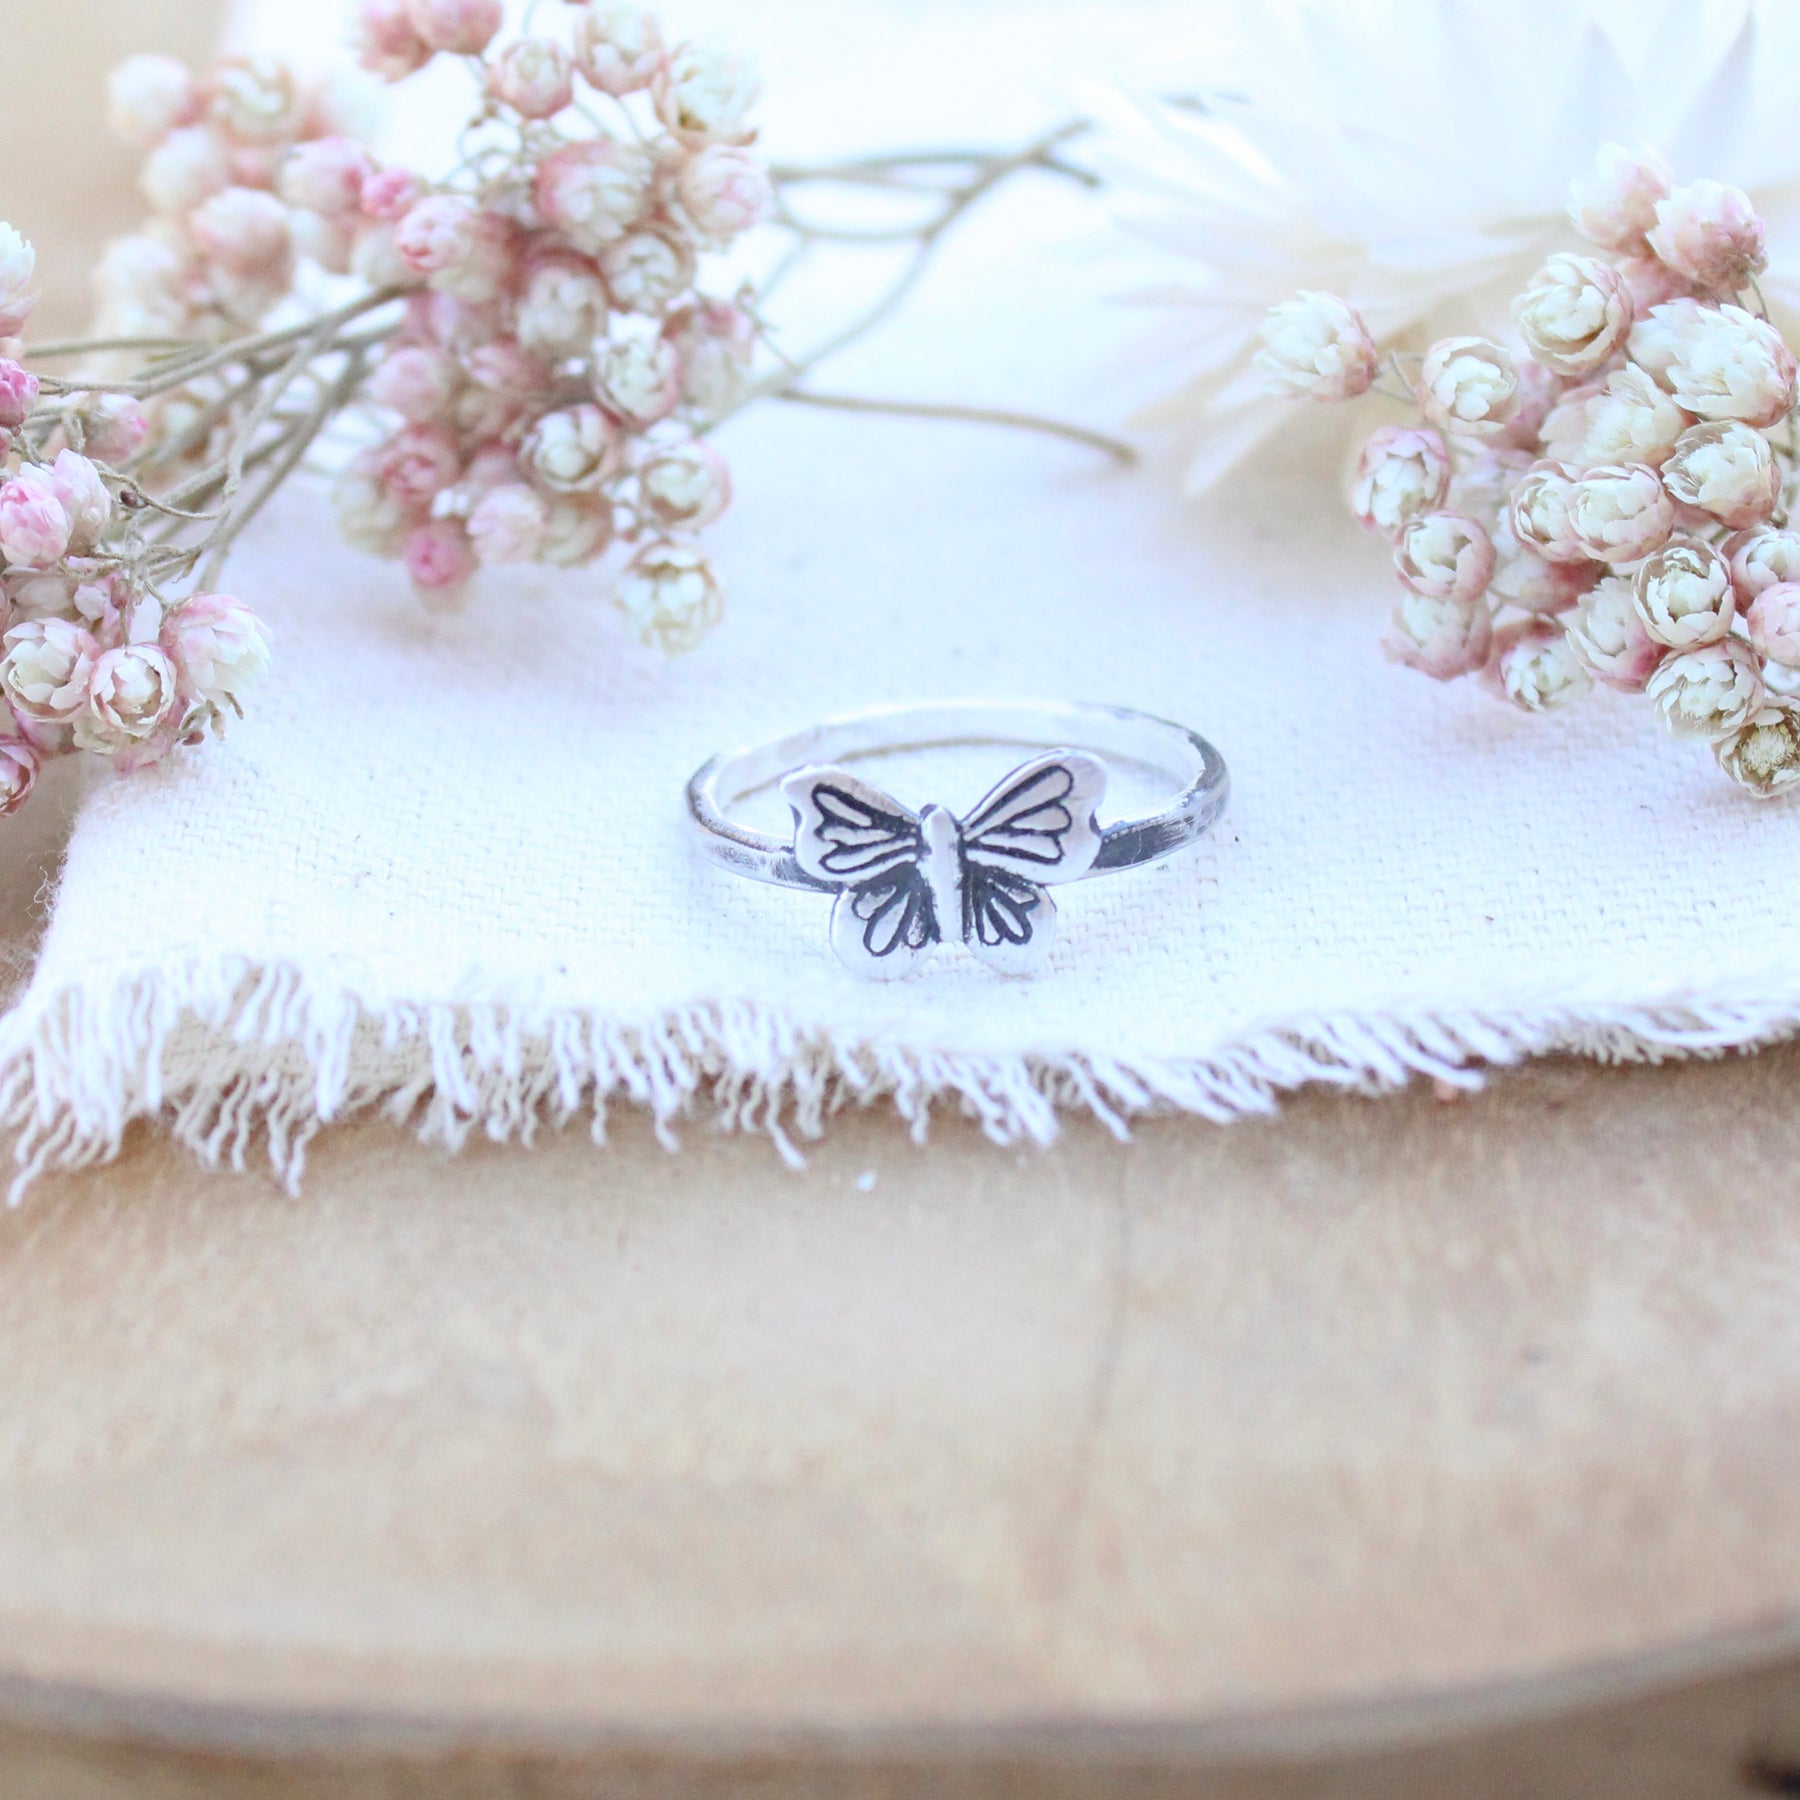 Little Butterfly Stacking Ring - The BECOMING Collection